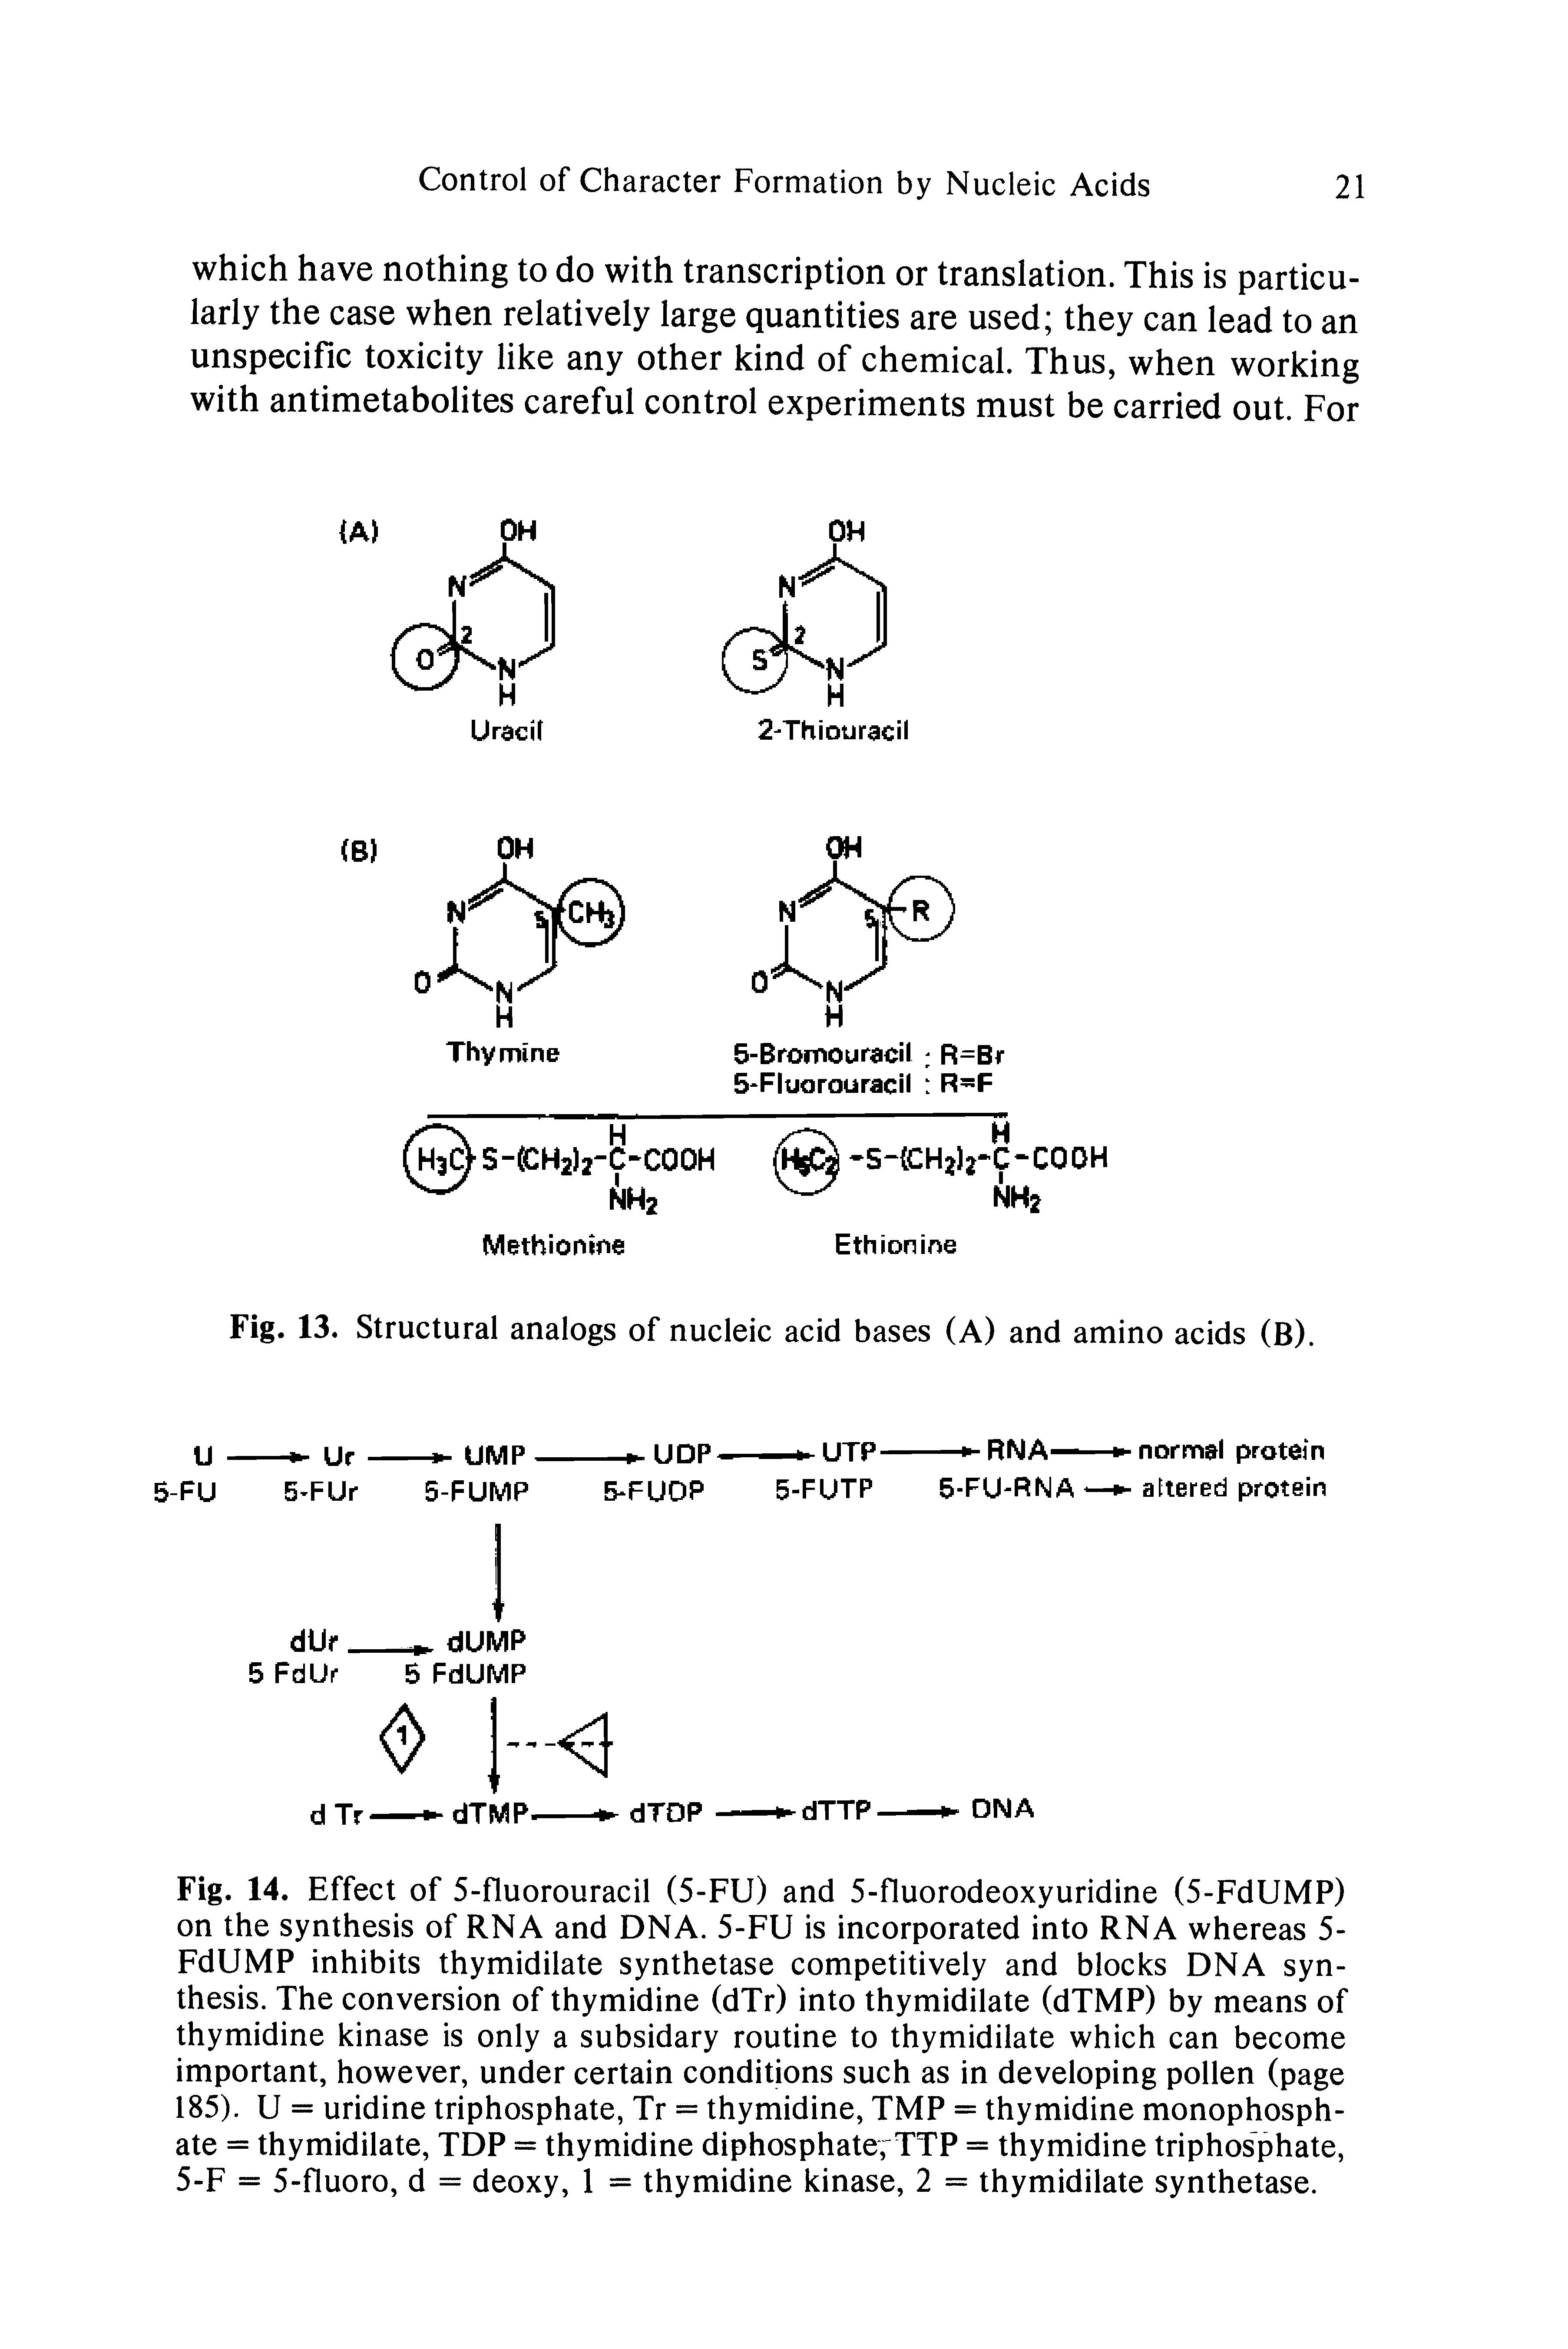 Fig. 14. Effect of 5-fluorouracil (5-FU) and 5-fluorodeoxyuridine (5-FdUMP) on the synthesis of RNA and DNA. 5-FU is incorporated into RNA whereas 5-FdUMP inhibits thymidilate synthetase competitively and blocks DNA synthesis. The conversion of thymidine (dTr) into thymidilate (dTMP) by means of thymidine kinase is only a subsidary routine to thymidilate which can become important, however, under certain conditions such as in developing pollen (page 185). U = uridine triphosphate, Tr = thymidine, TMP = thymidine monophosphate = thymidilate, TDP = thymidine diphosphate, TTP = thymidine triphosphate, 5-F = 5-fluoro, d = deoxy, 1 = thymidine kinase, 2 = thymidilate synthetase.